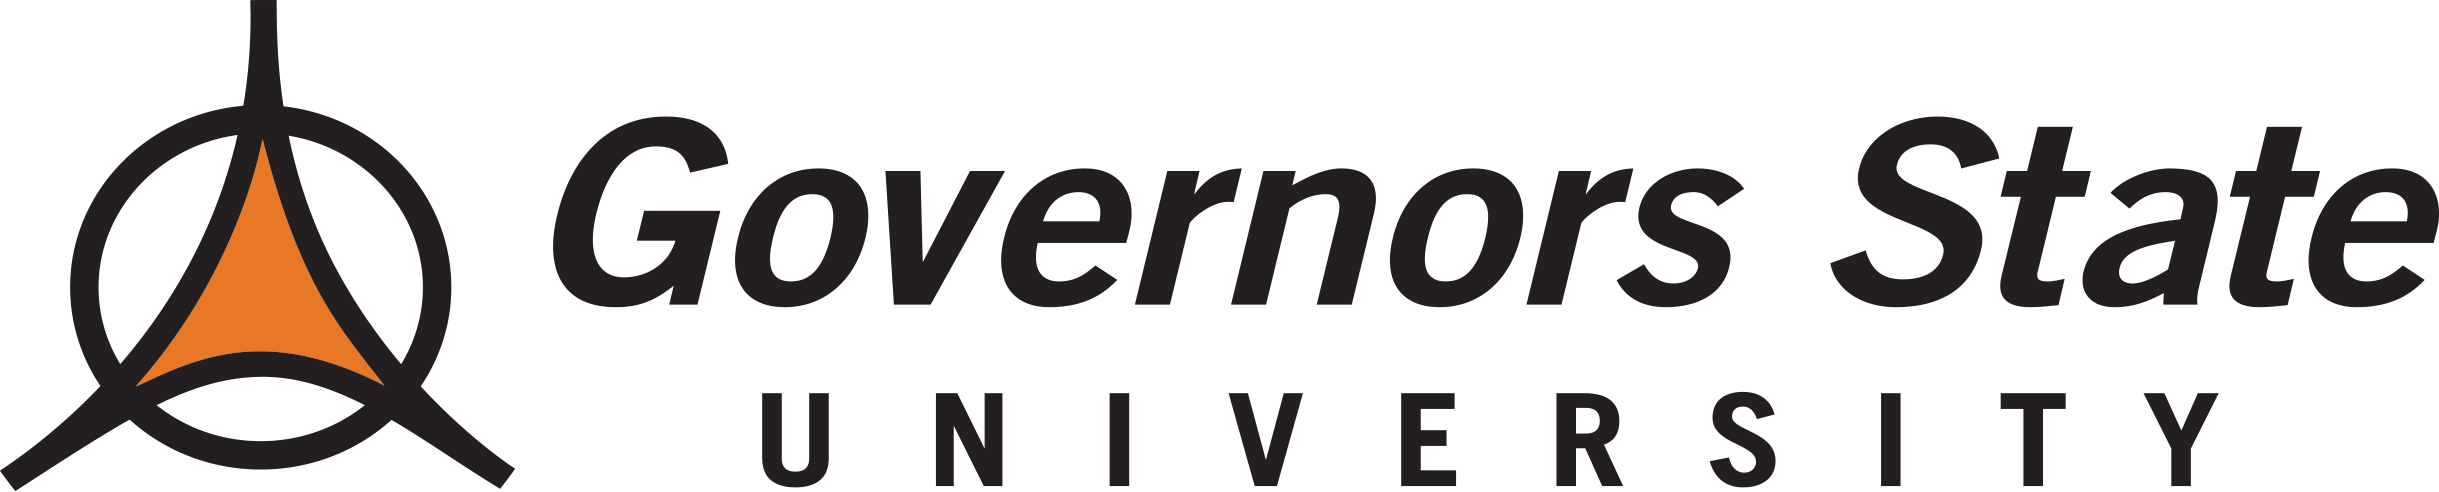 GOVERNORS STATE UNIVERSITY logo